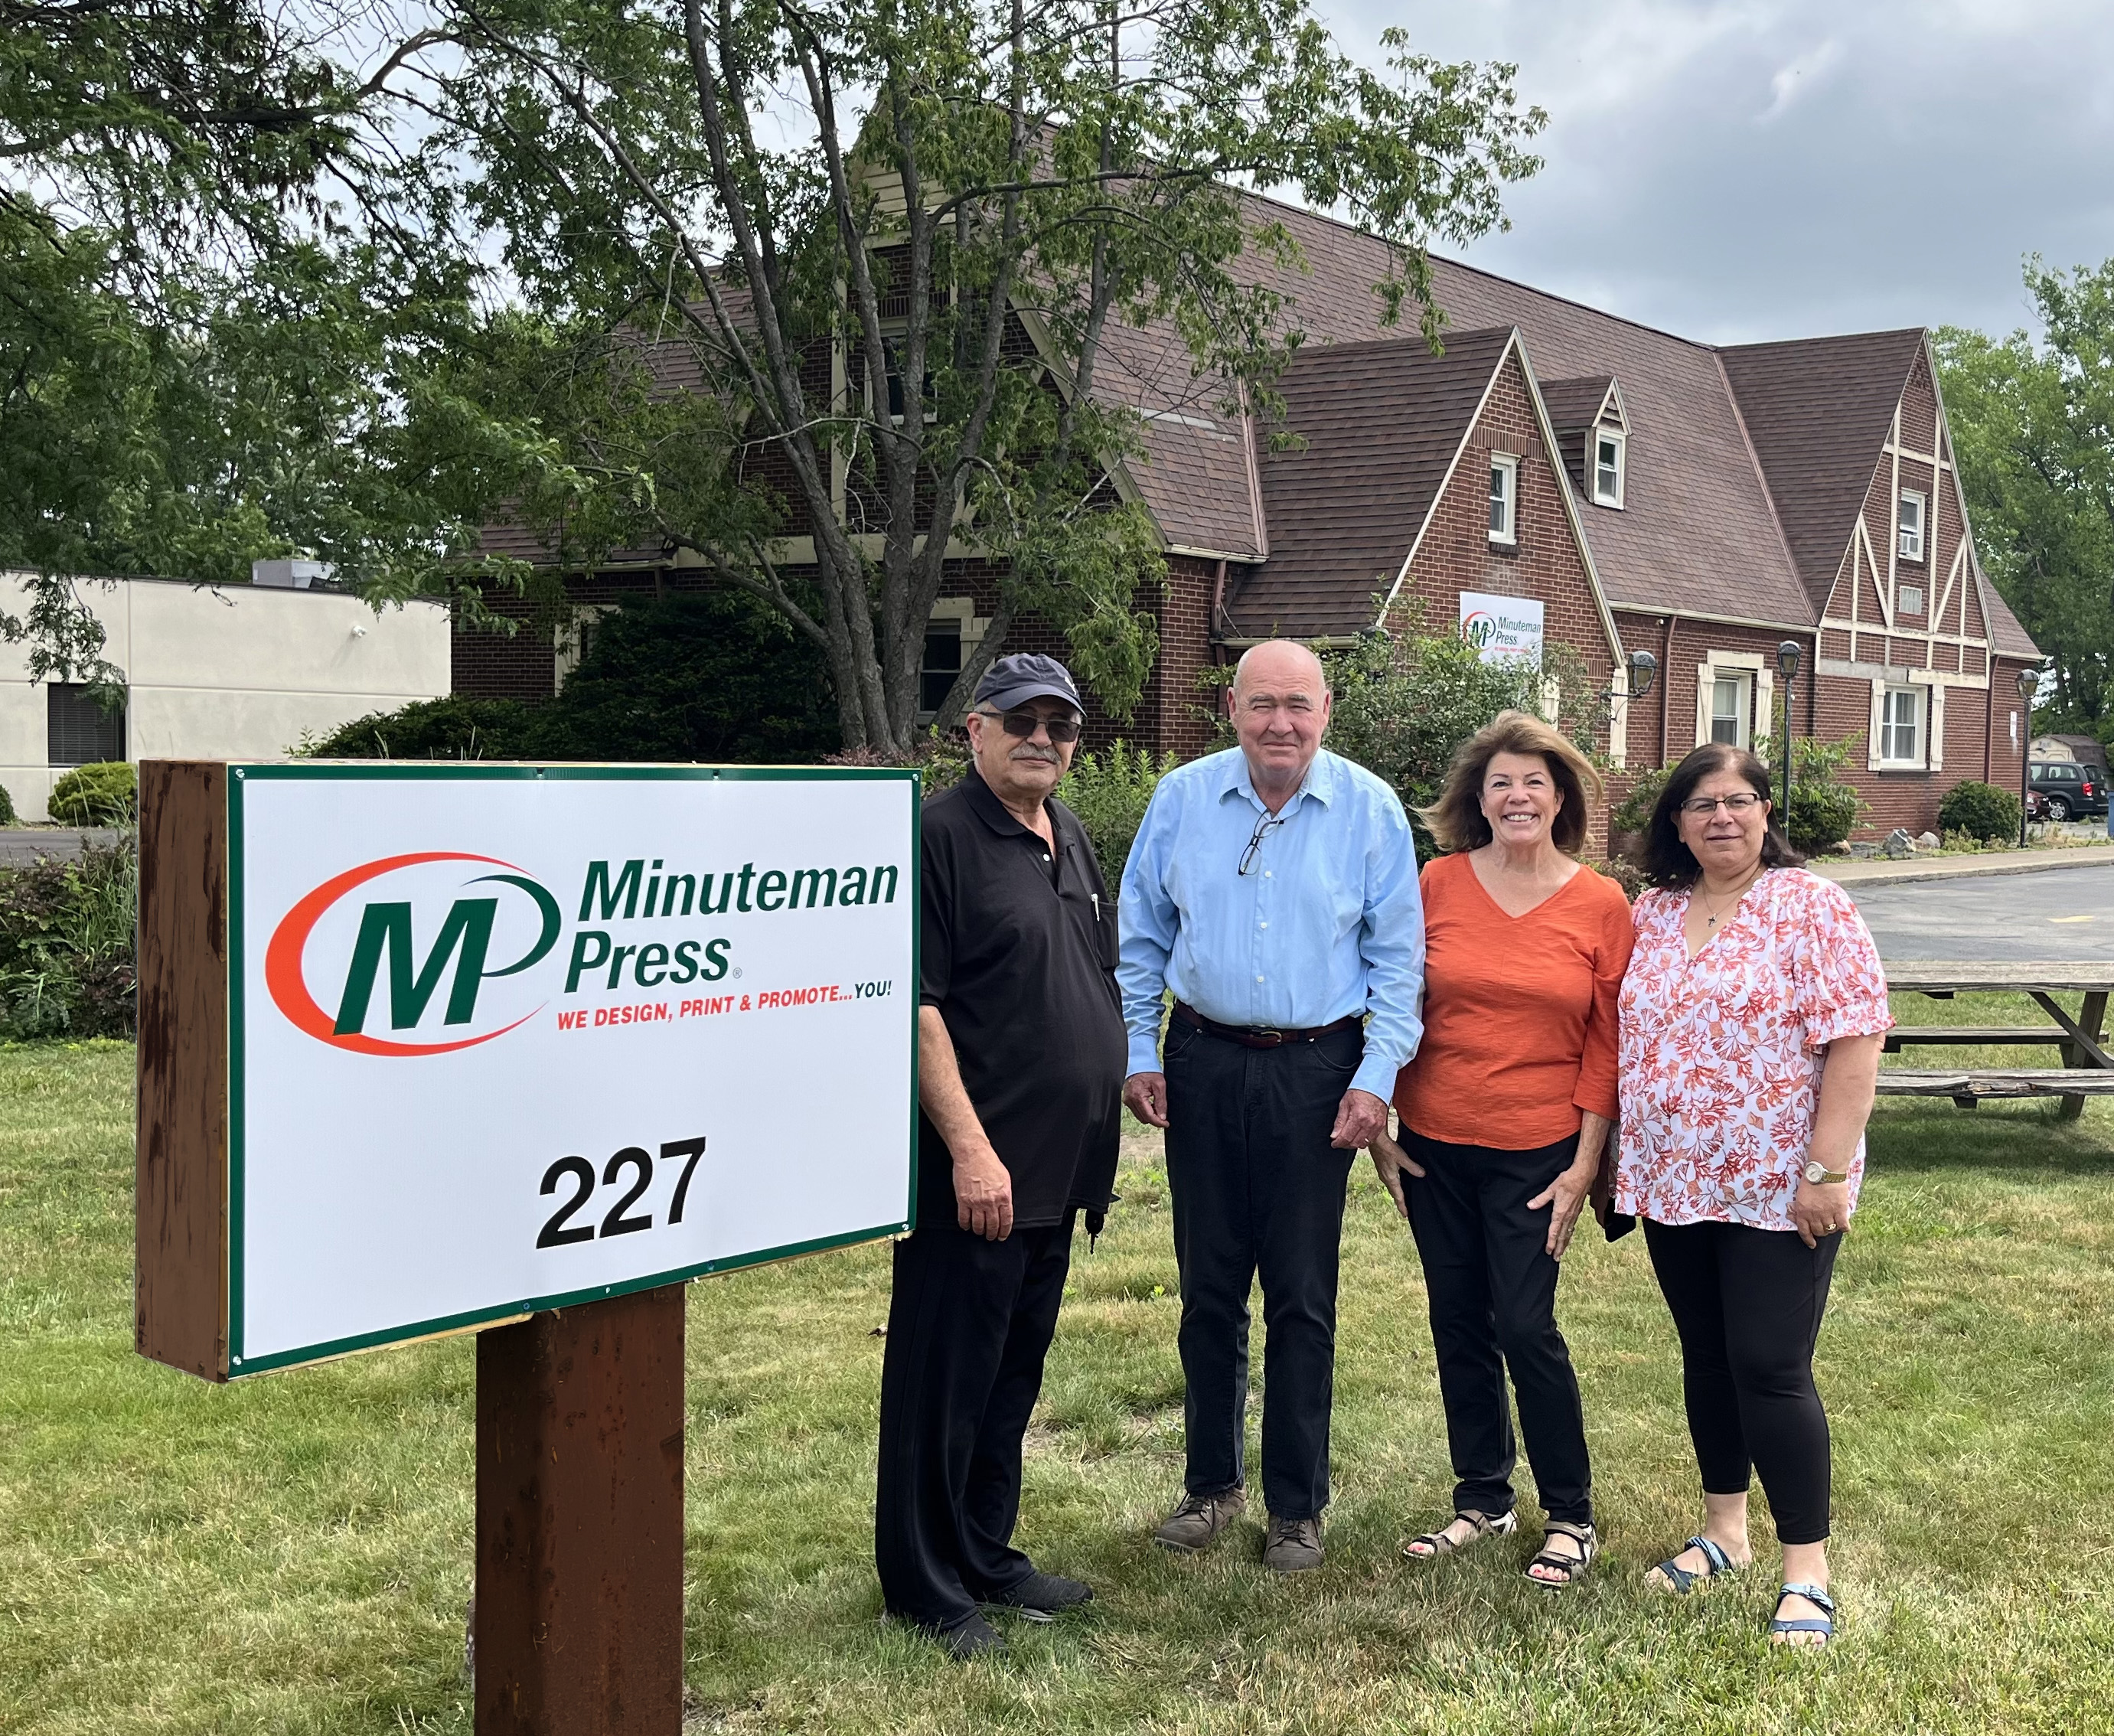 Avon Lake Printing and Signs is now Minuteman Press, Avon Lake, Ohio. Pictured L-R: Jasser Jasser, co-owner, Minuteman Press; Thomas and Mary Jane Brock, former owners, Avon Lake Printing and Signs; and Majdolin Jasser, co-owner, Minuteman Press. https://sellyourprintingbusiness.com